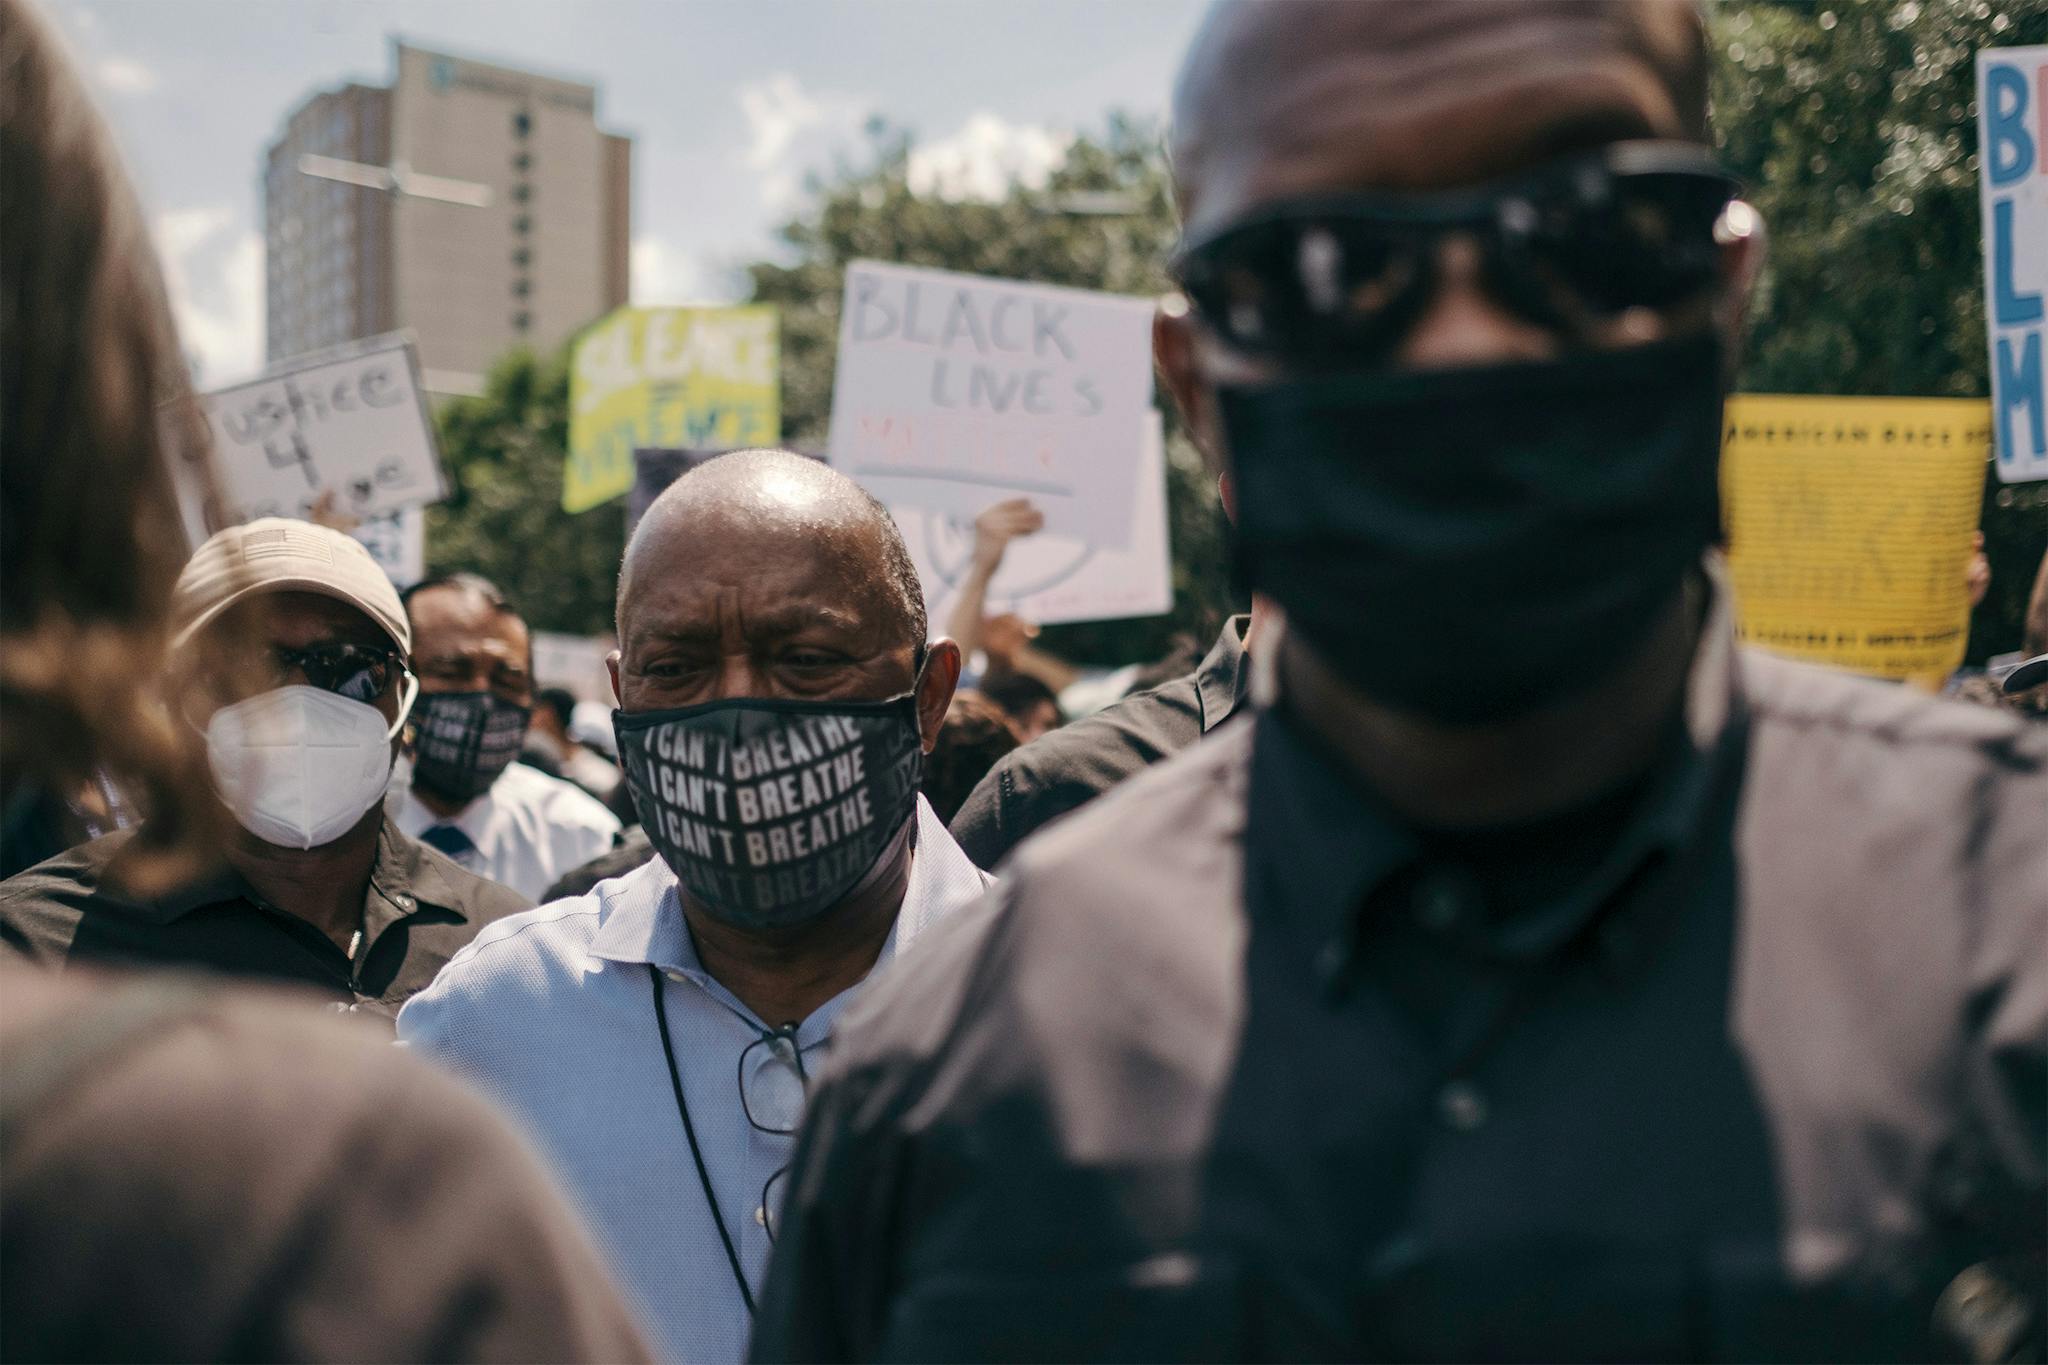 Mayor Sylvester Turner wears an "I Can't Breathe" mask during a march to honor the memory of George Floyd in downtown Houston on June 2, 2020.